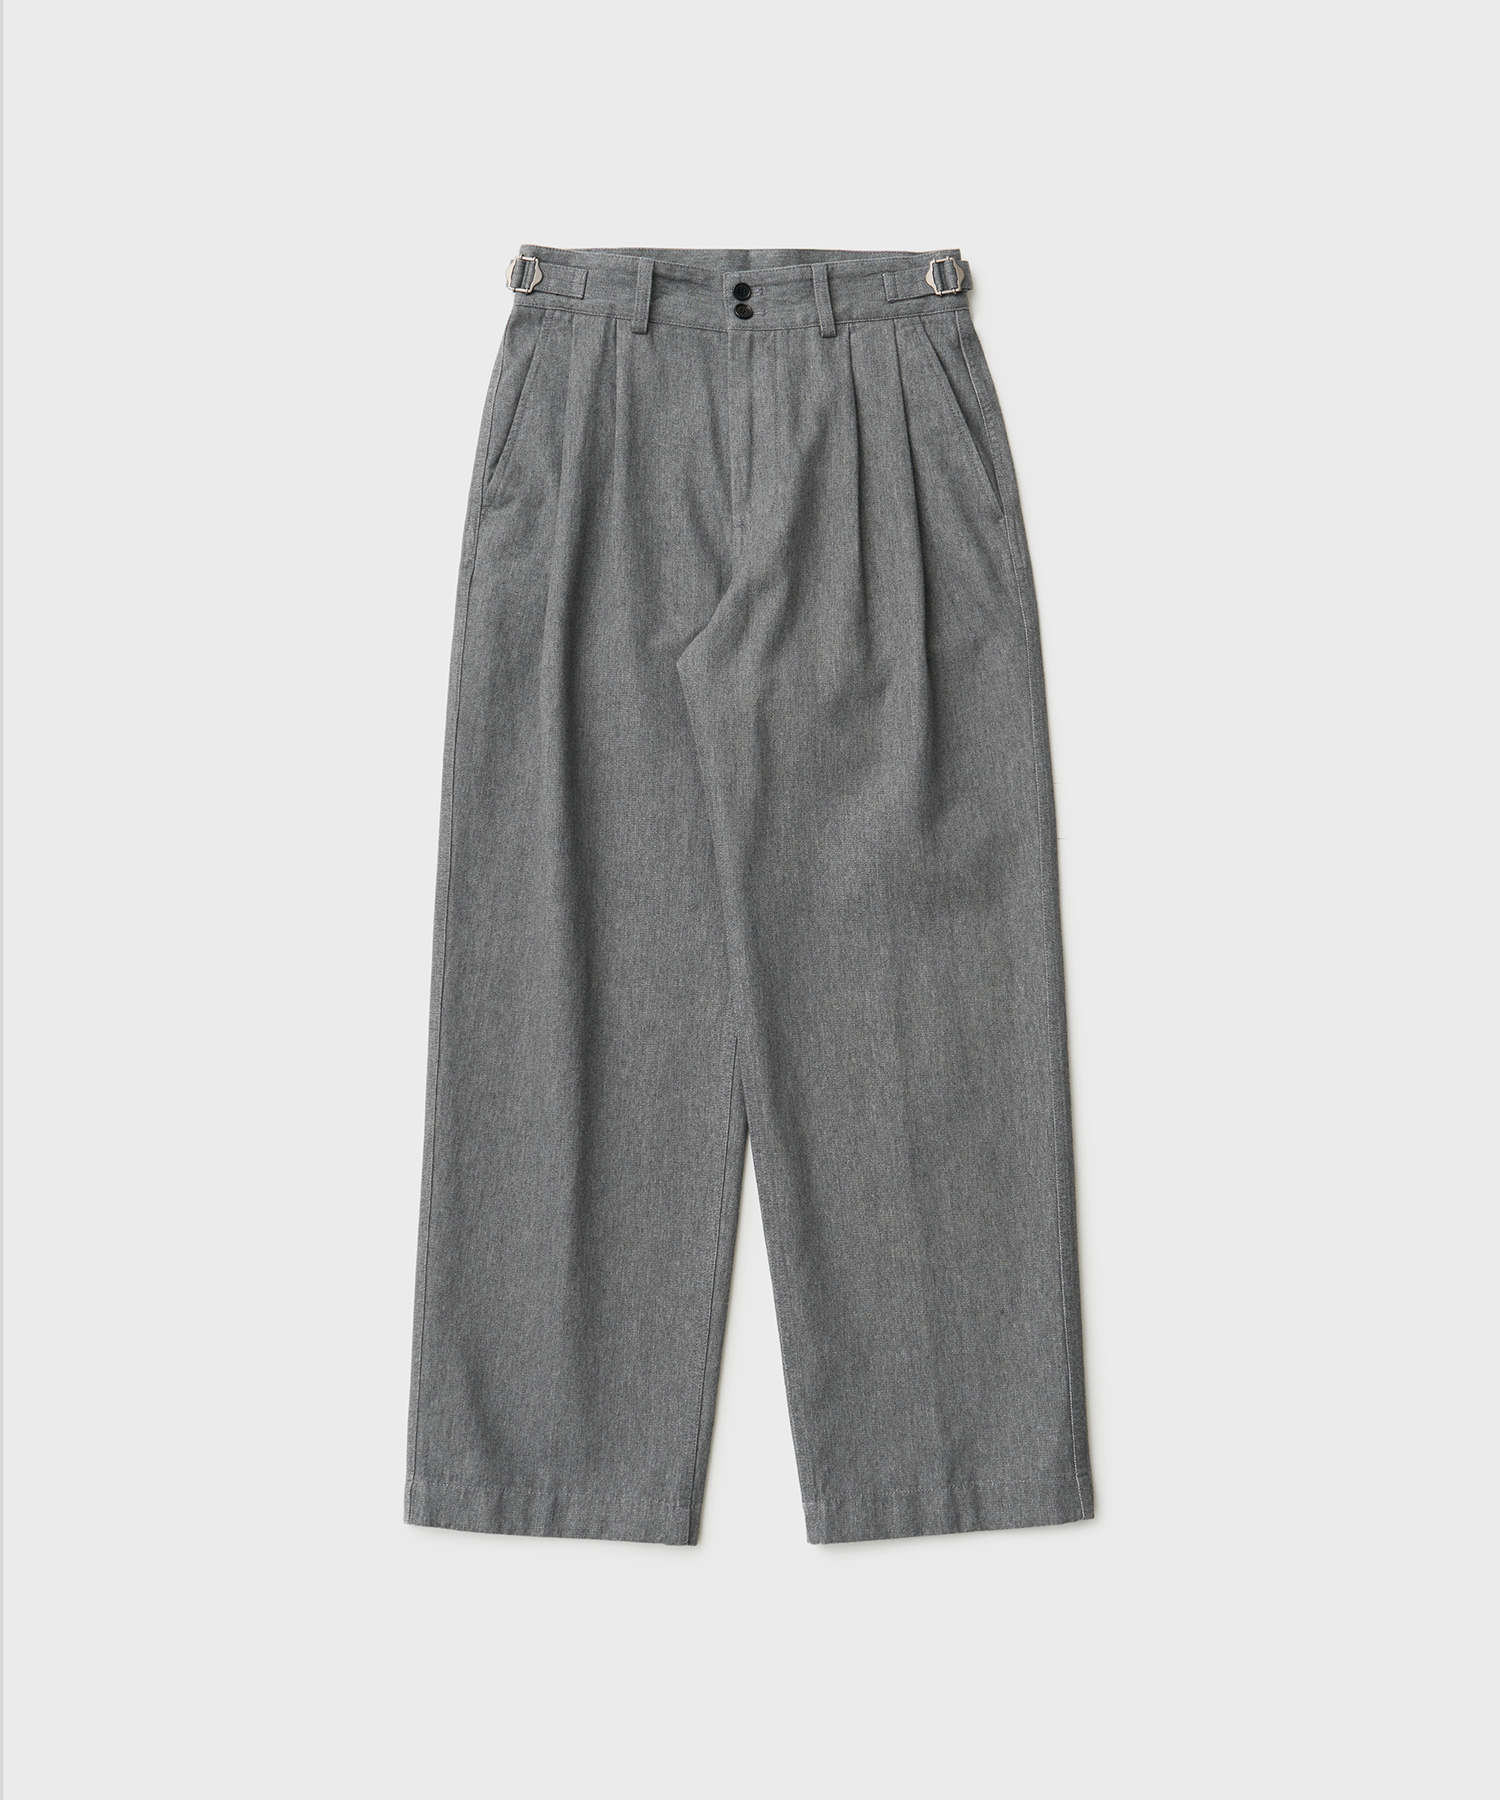 23AW Santiago Officer Pants (Heather Gray)